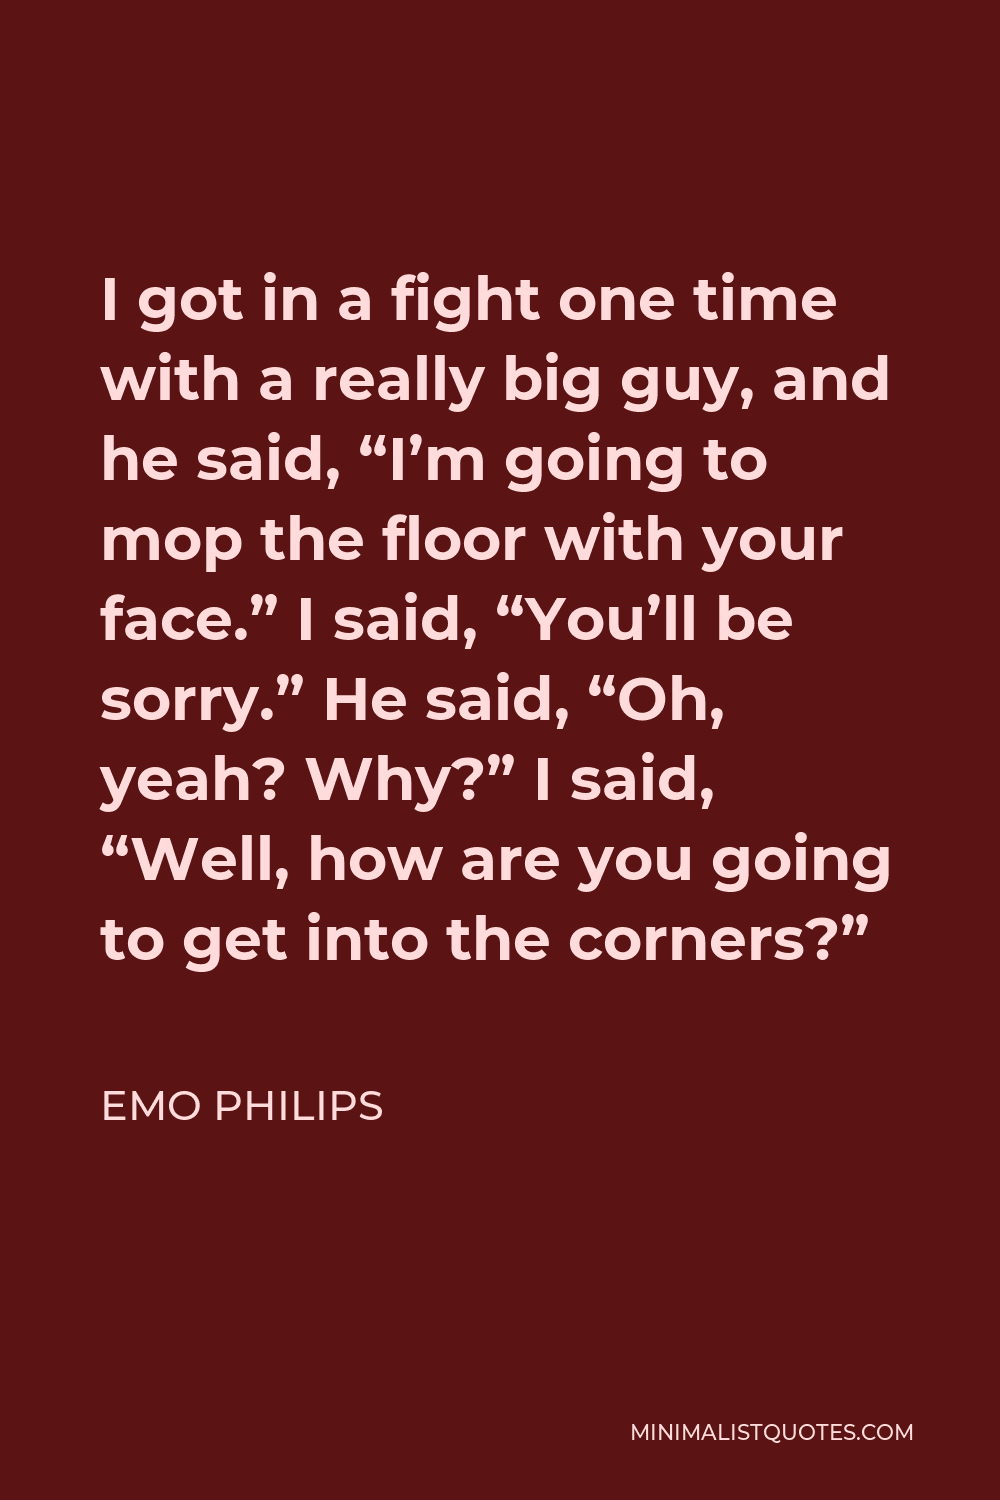 Emo Philips Quote - I got in a fight one time with a really big guy, and he said, “I’m going to mop the floor with your face.” I said, “You’ll be sorry.” He said, “Oh, yeah? Why?” I said, “Well, how are you going to get into the corners?”